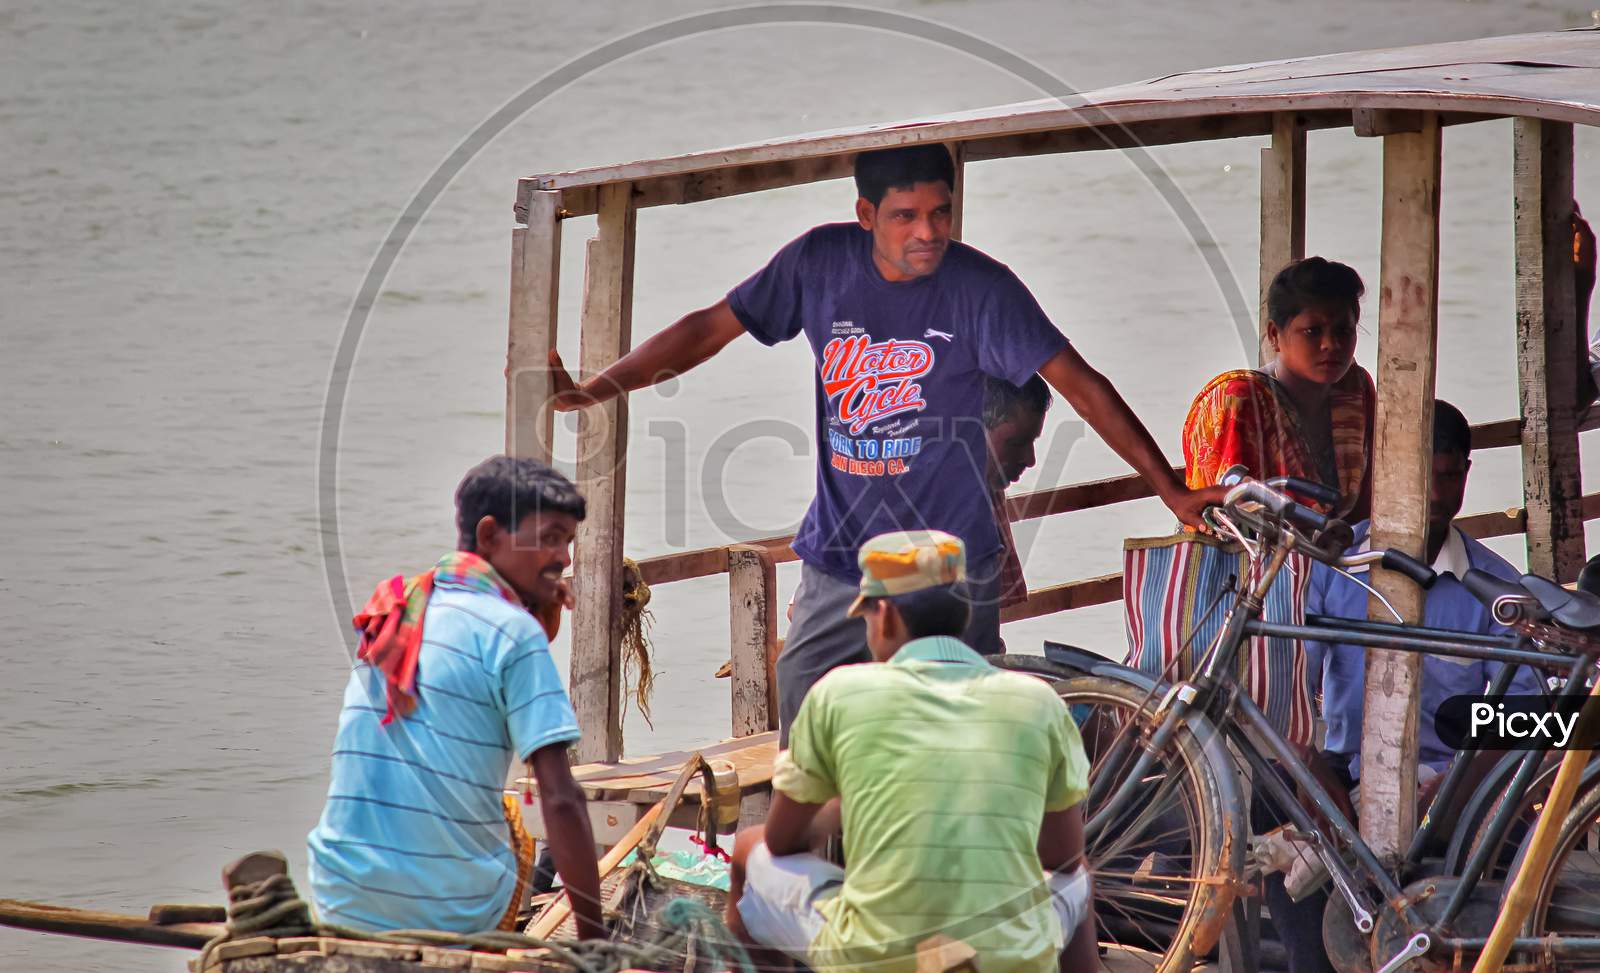 Local Life At Rural Sides Of Calcutta .